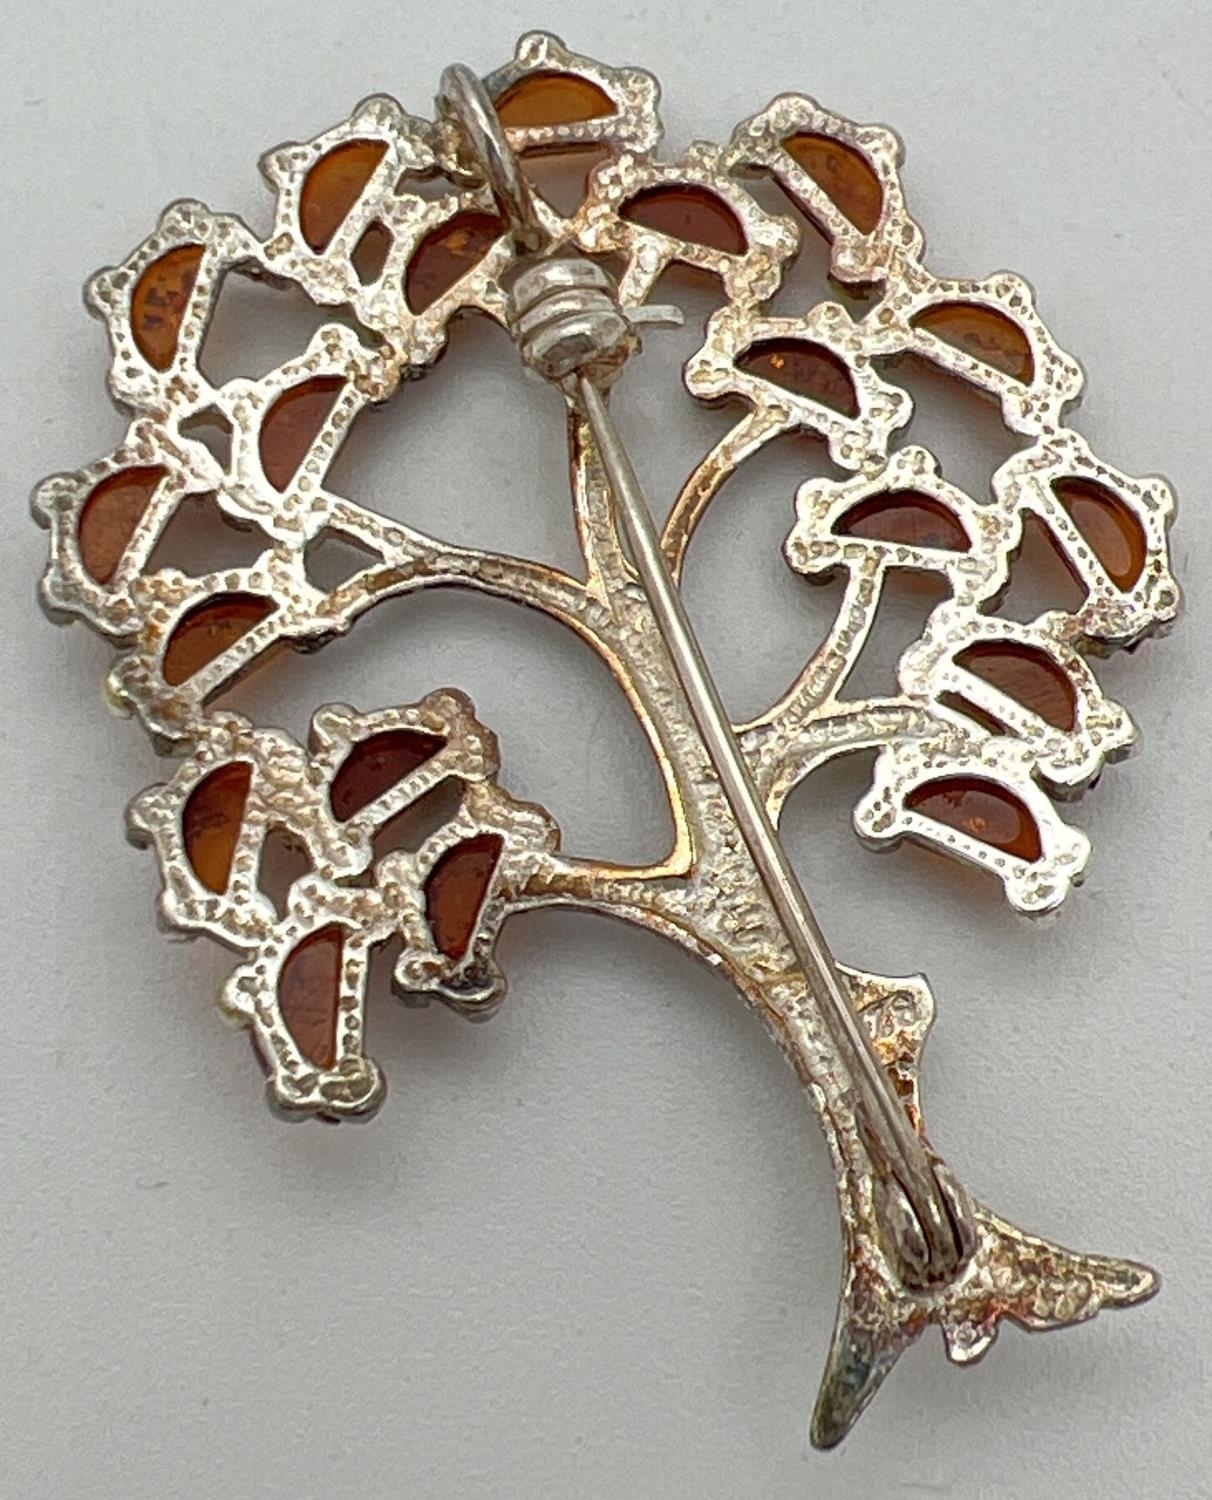 A 925 silver pendant/brooch in the shape of a tree, set with 19 small pieces of cognac amber. - Image 2 of 2